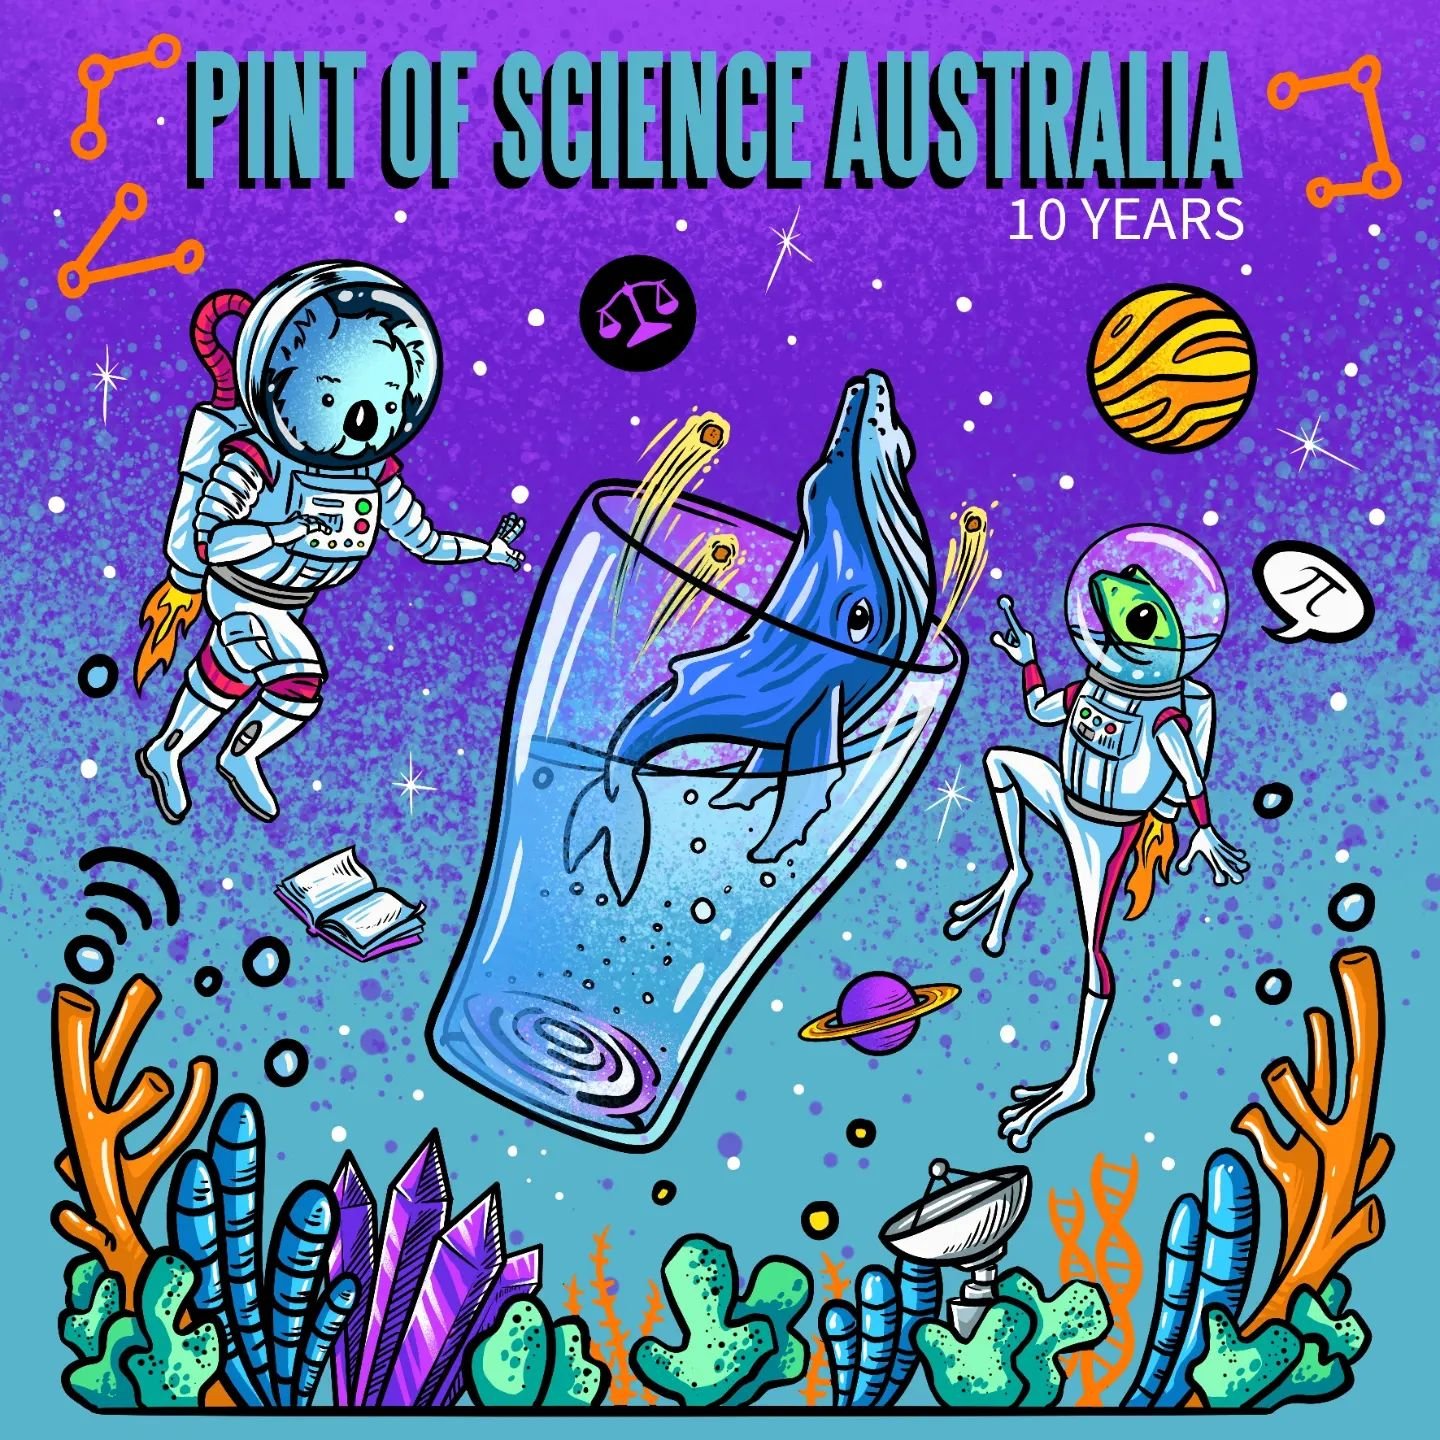 It's that time of year again! Pint of Science is coming to Cairns! And it's we are celebrating 10 years of @pintofscienceau!

Tickets are on sale now and I'm super excited for the line up this year. We have speakers from @jamescookuniversity, @gbrmar